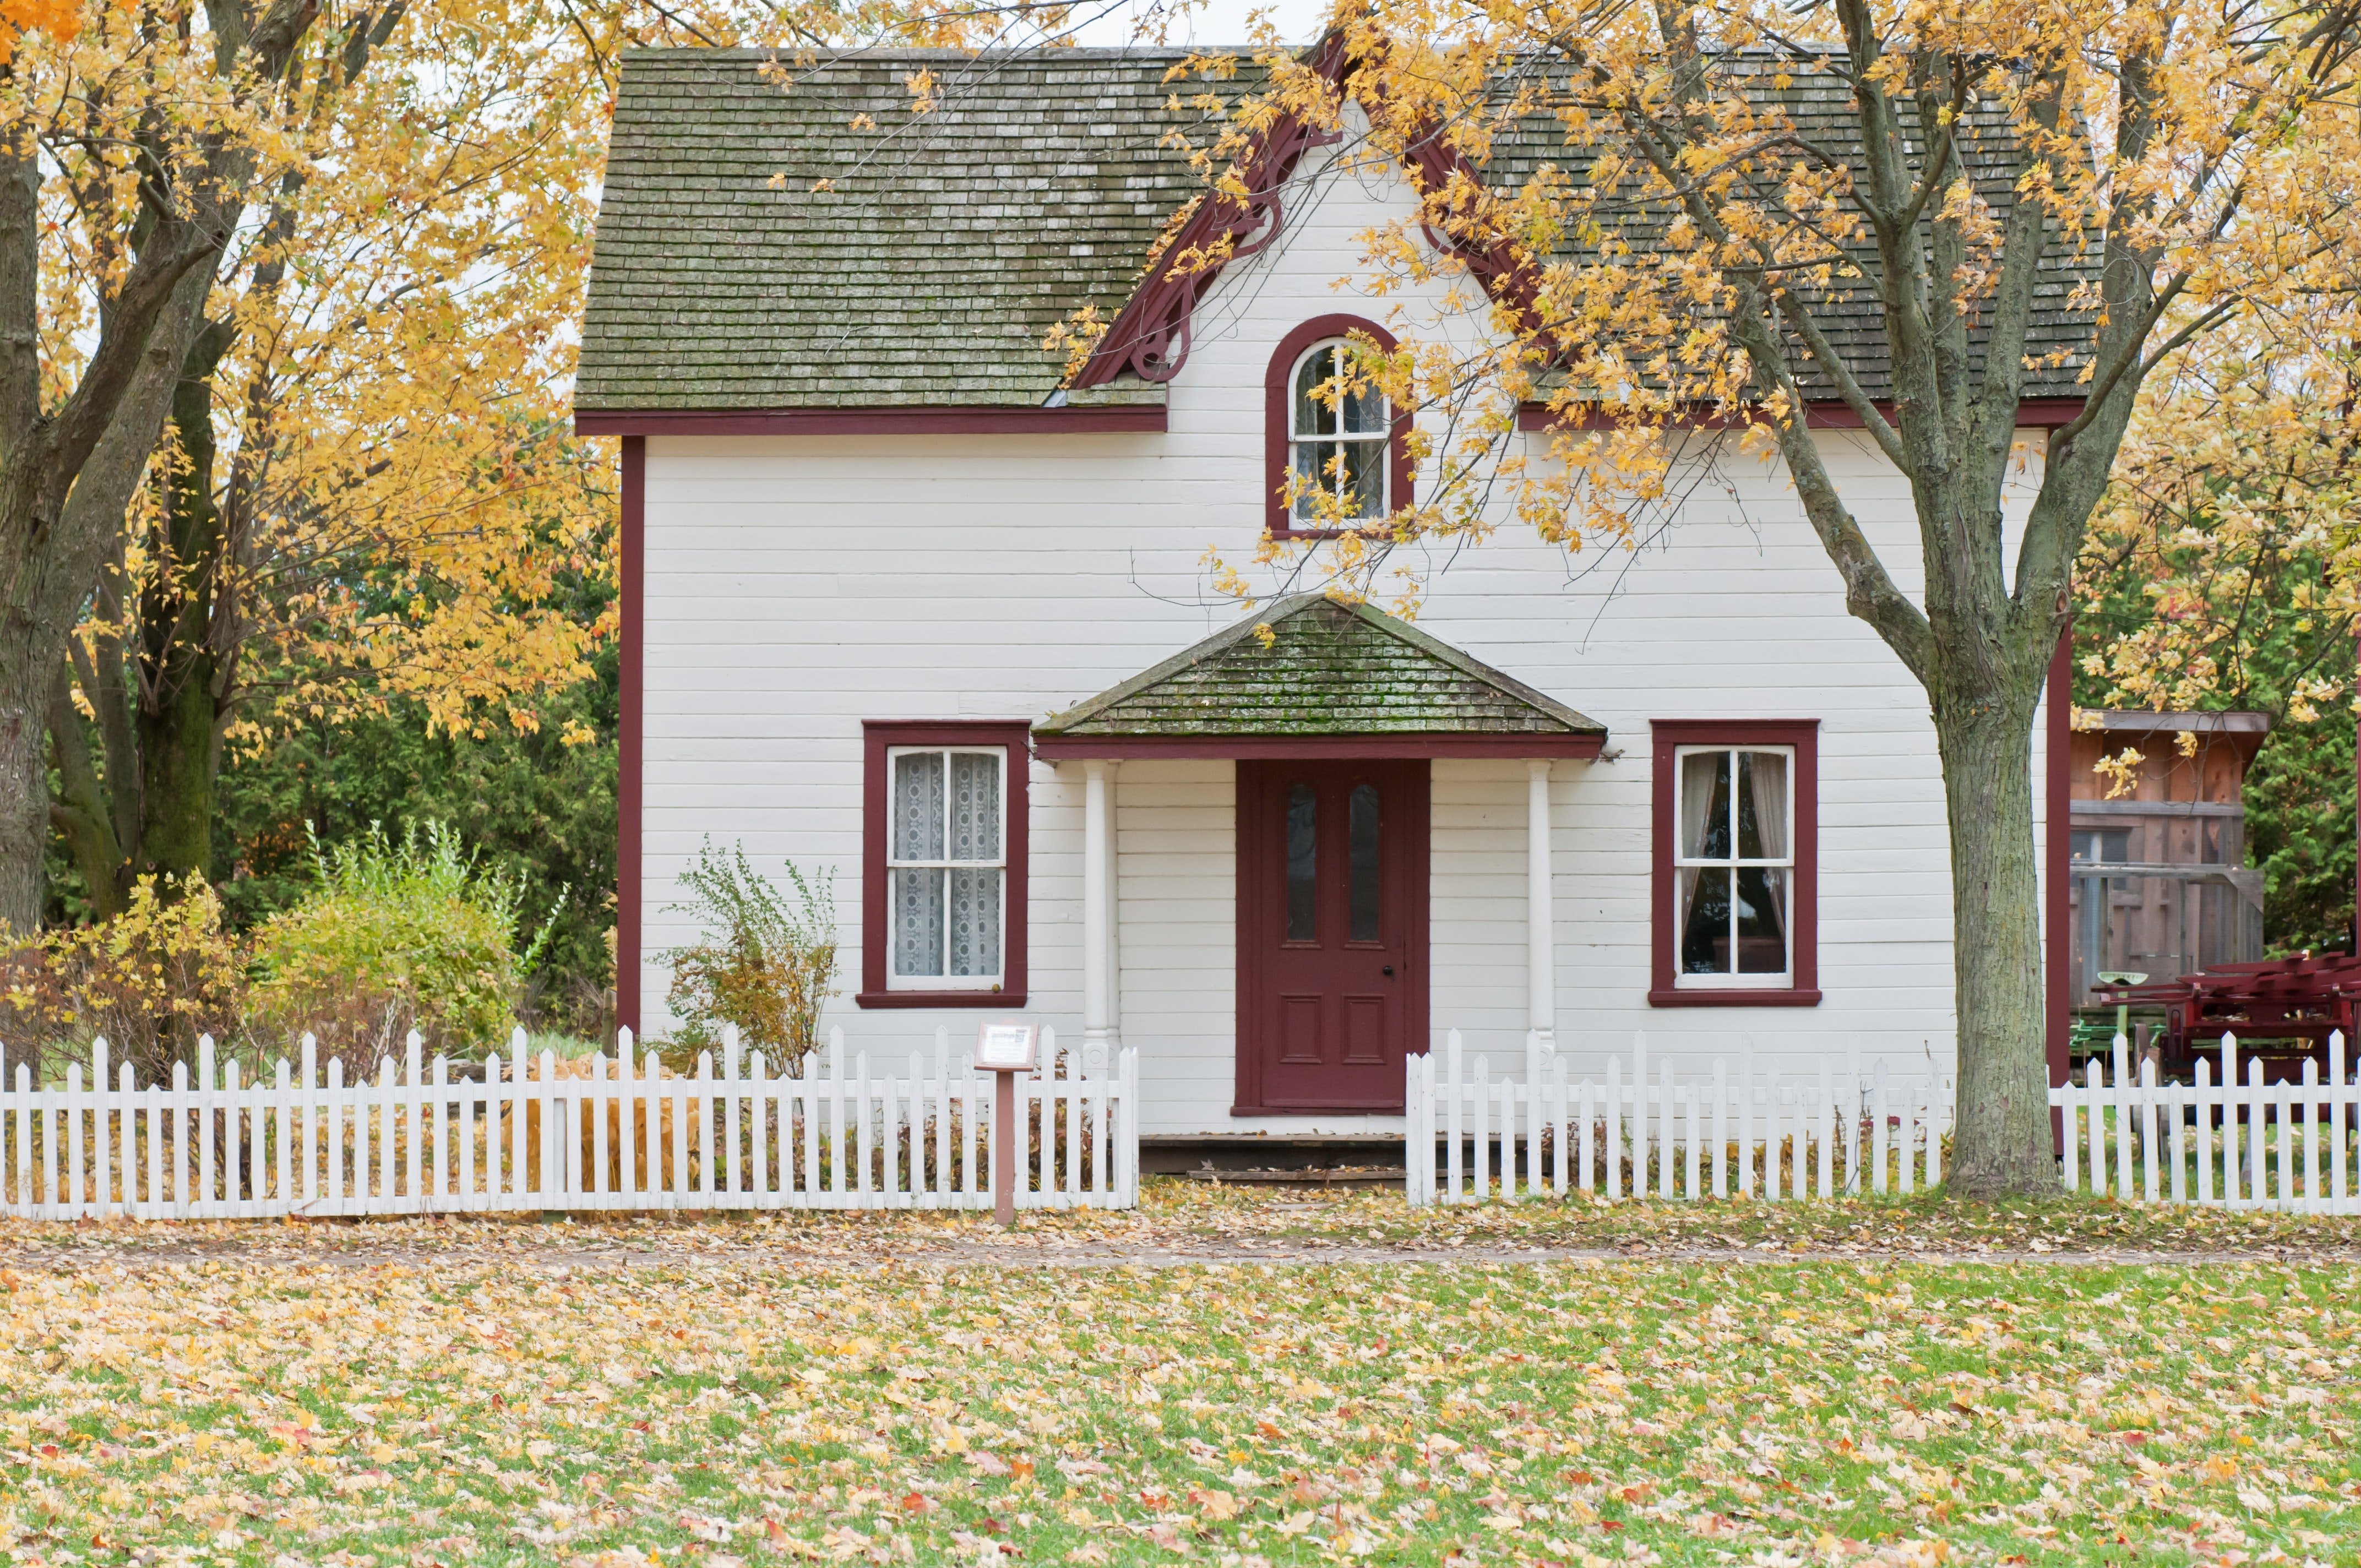 Mary sold the deed of the house to Ann, who later moved into it and raised her family there | Source: Pexels